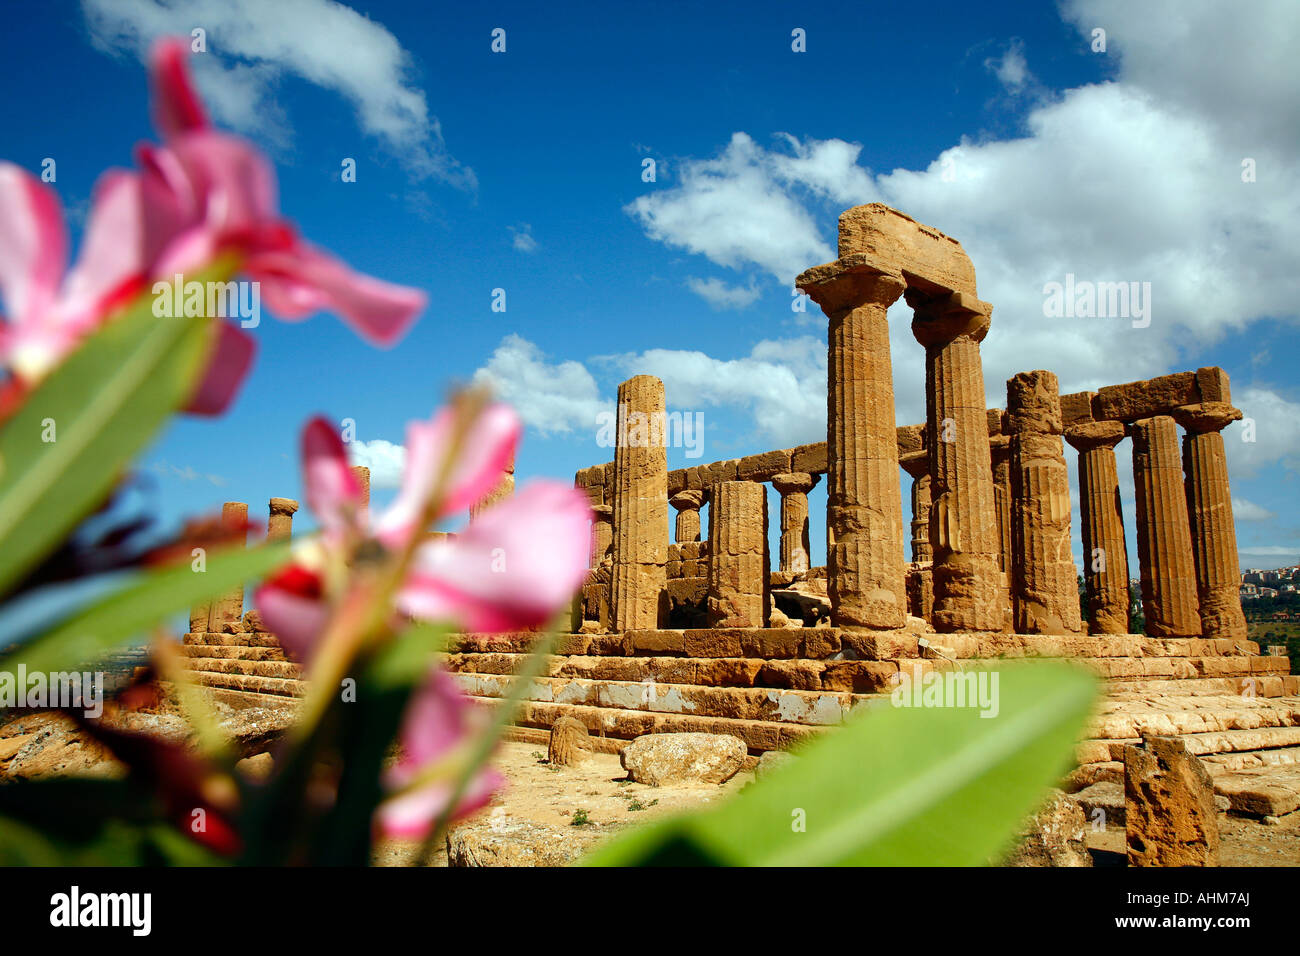 Juno Temple at the Valley of temples Agrigento Sicily Stock Photo